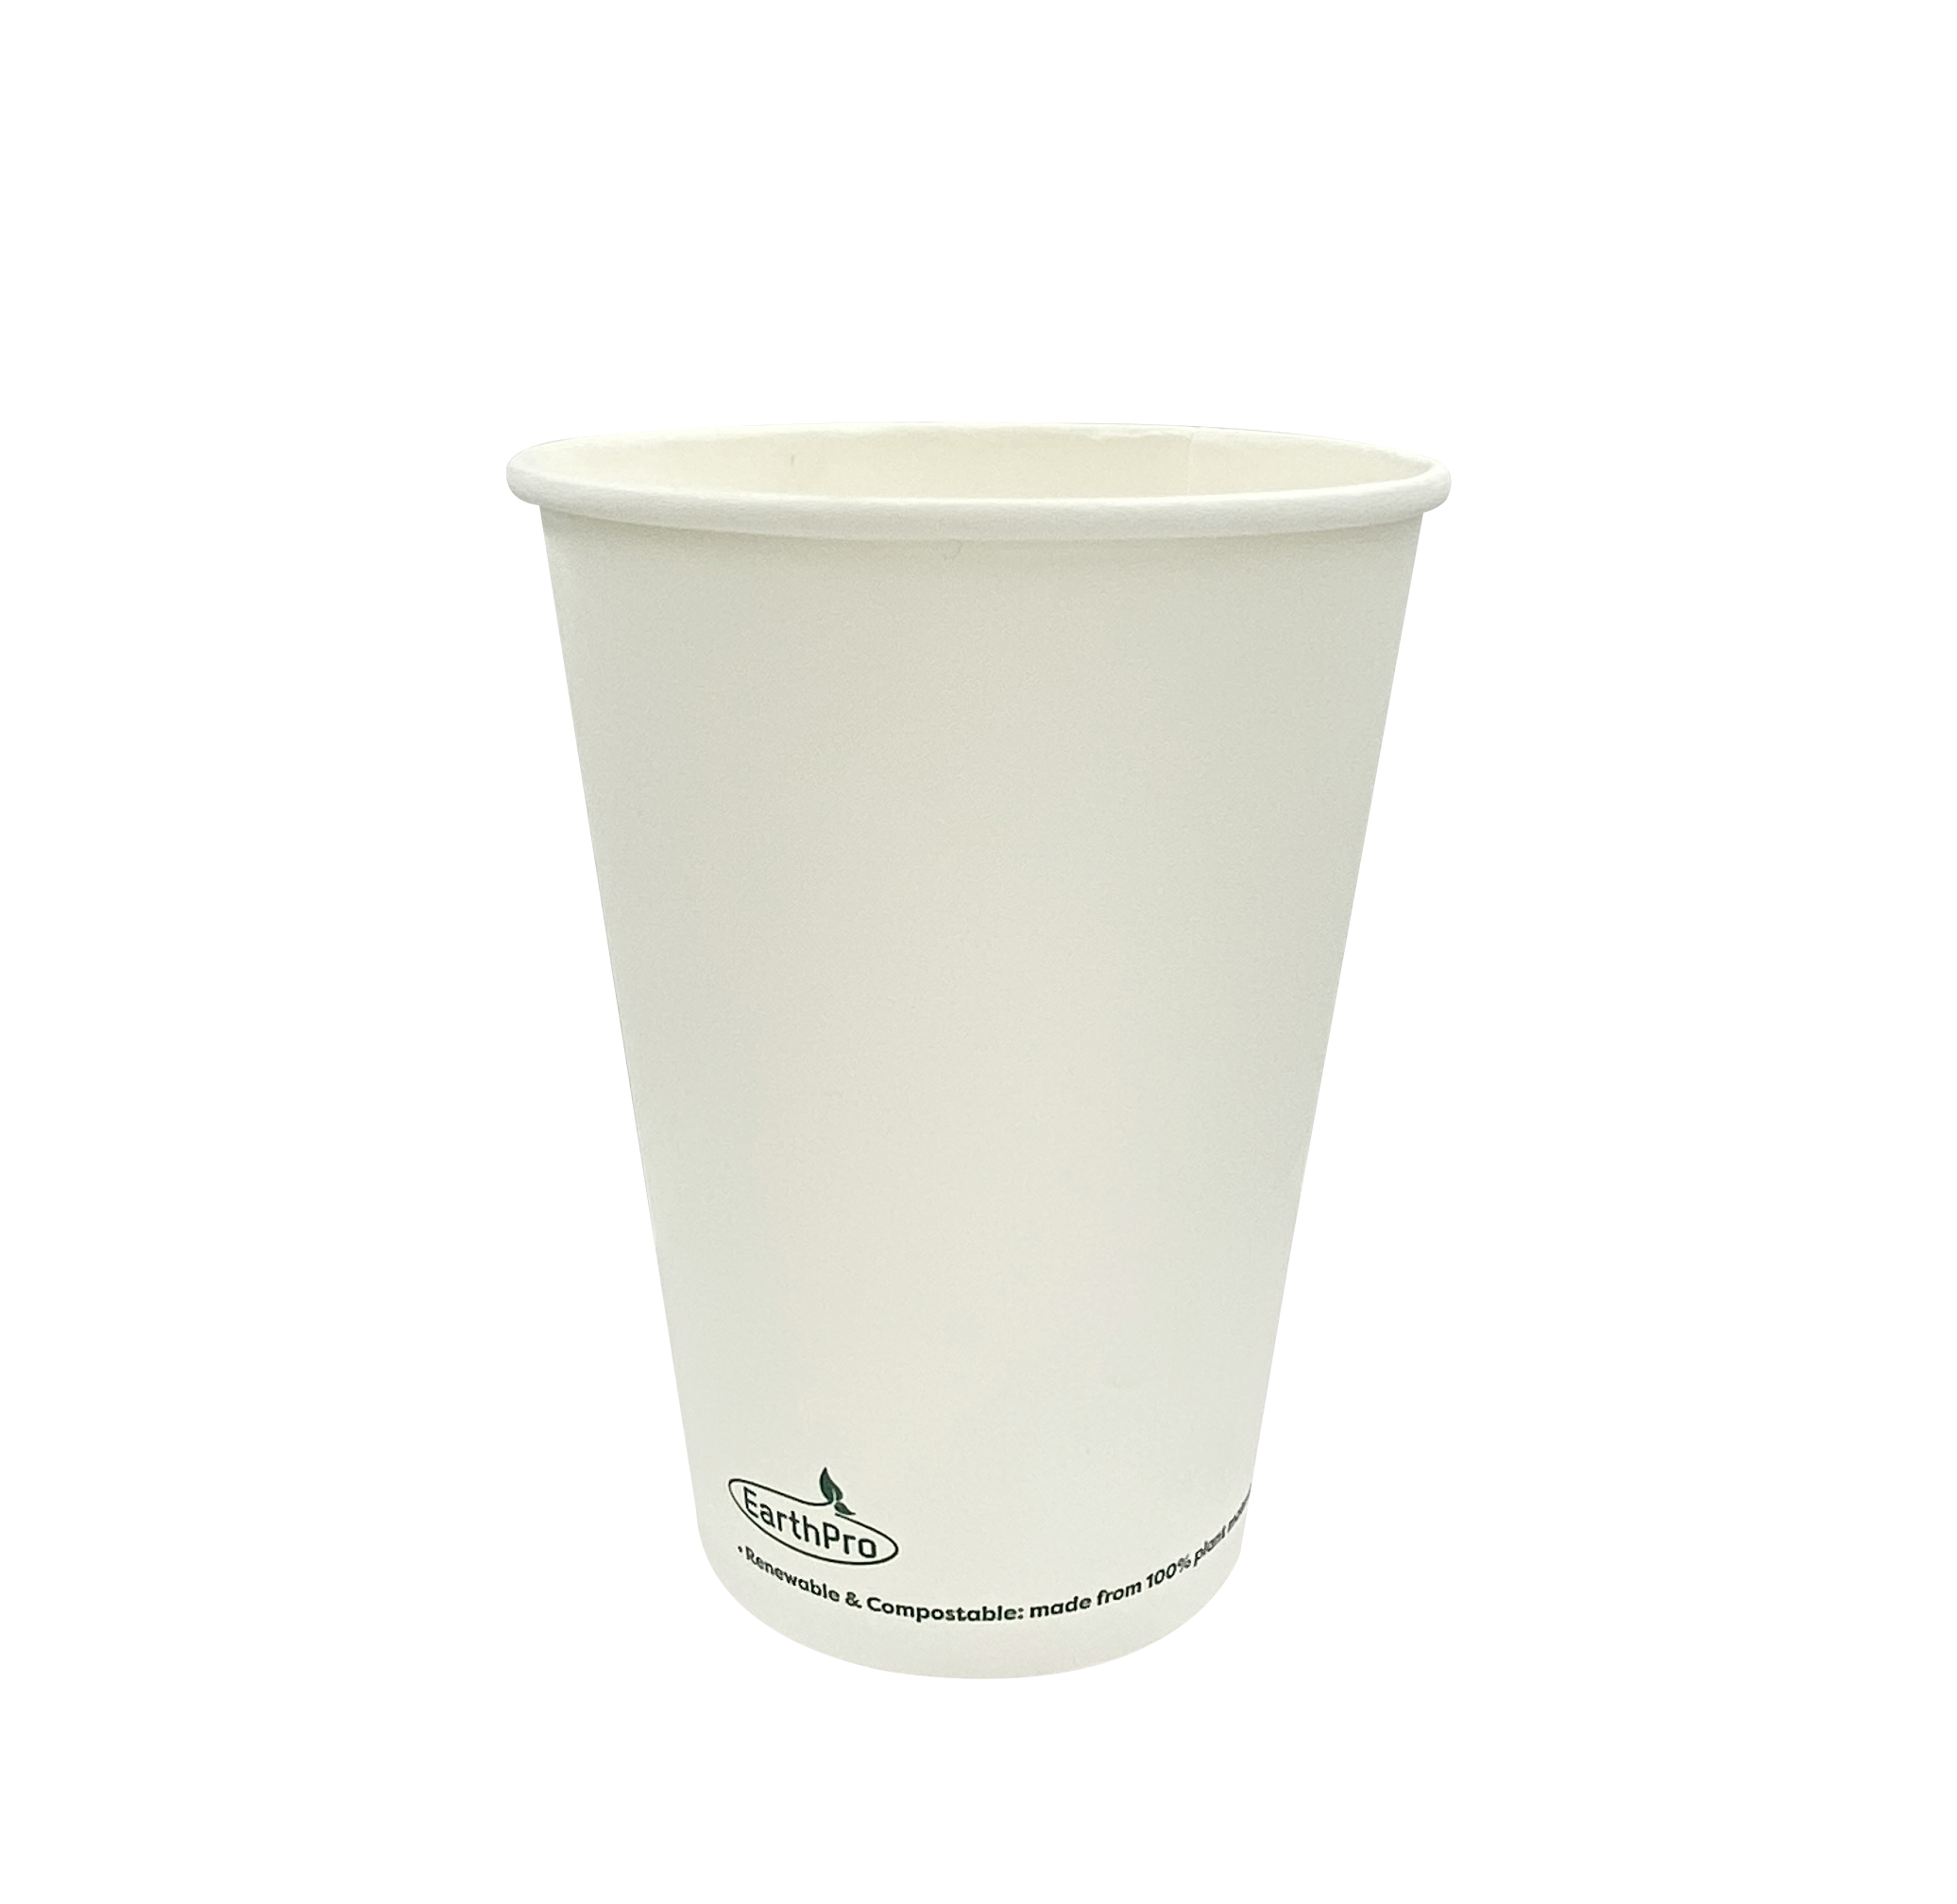 16oz Soup Cup Non-Printed Series White, ASTM D6868 Certified Compostable Cup